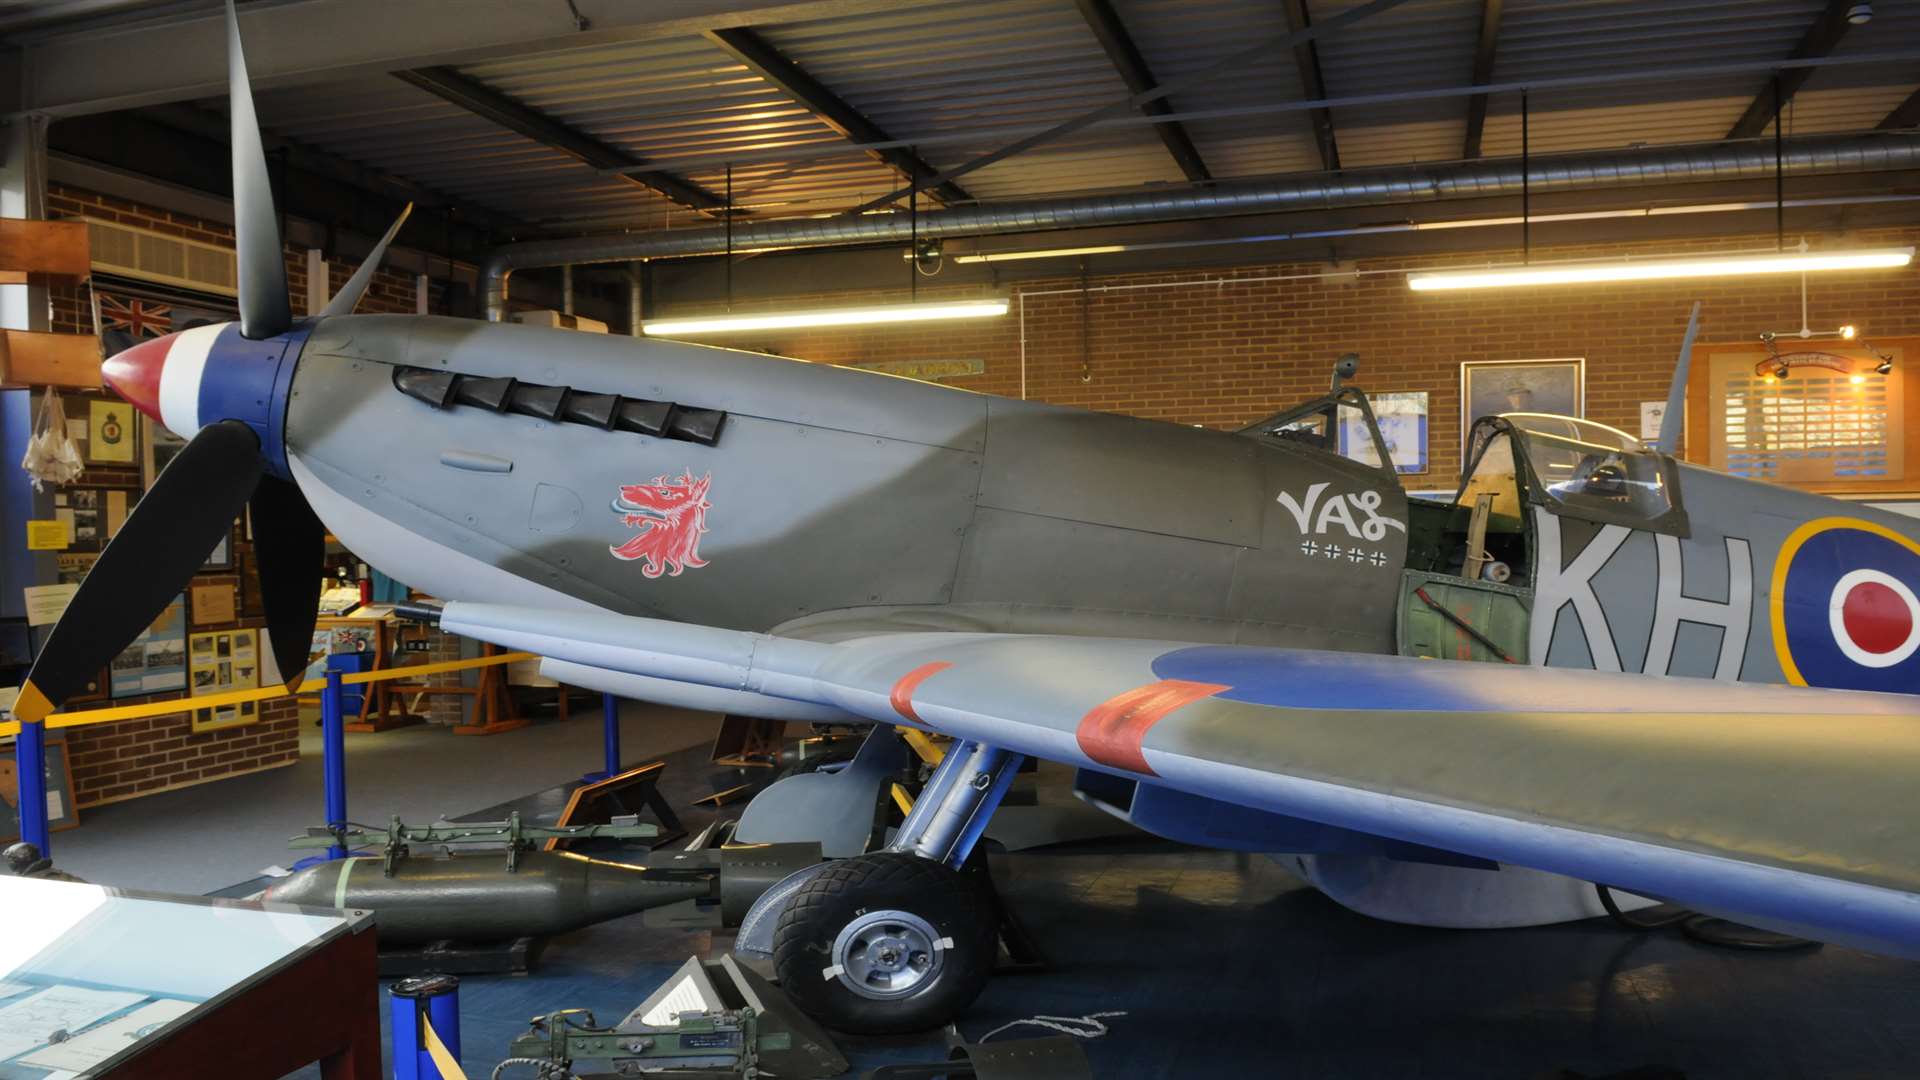 A Spitifre at the RAF Spitfire and Hurricane Memorial Museum at Manston